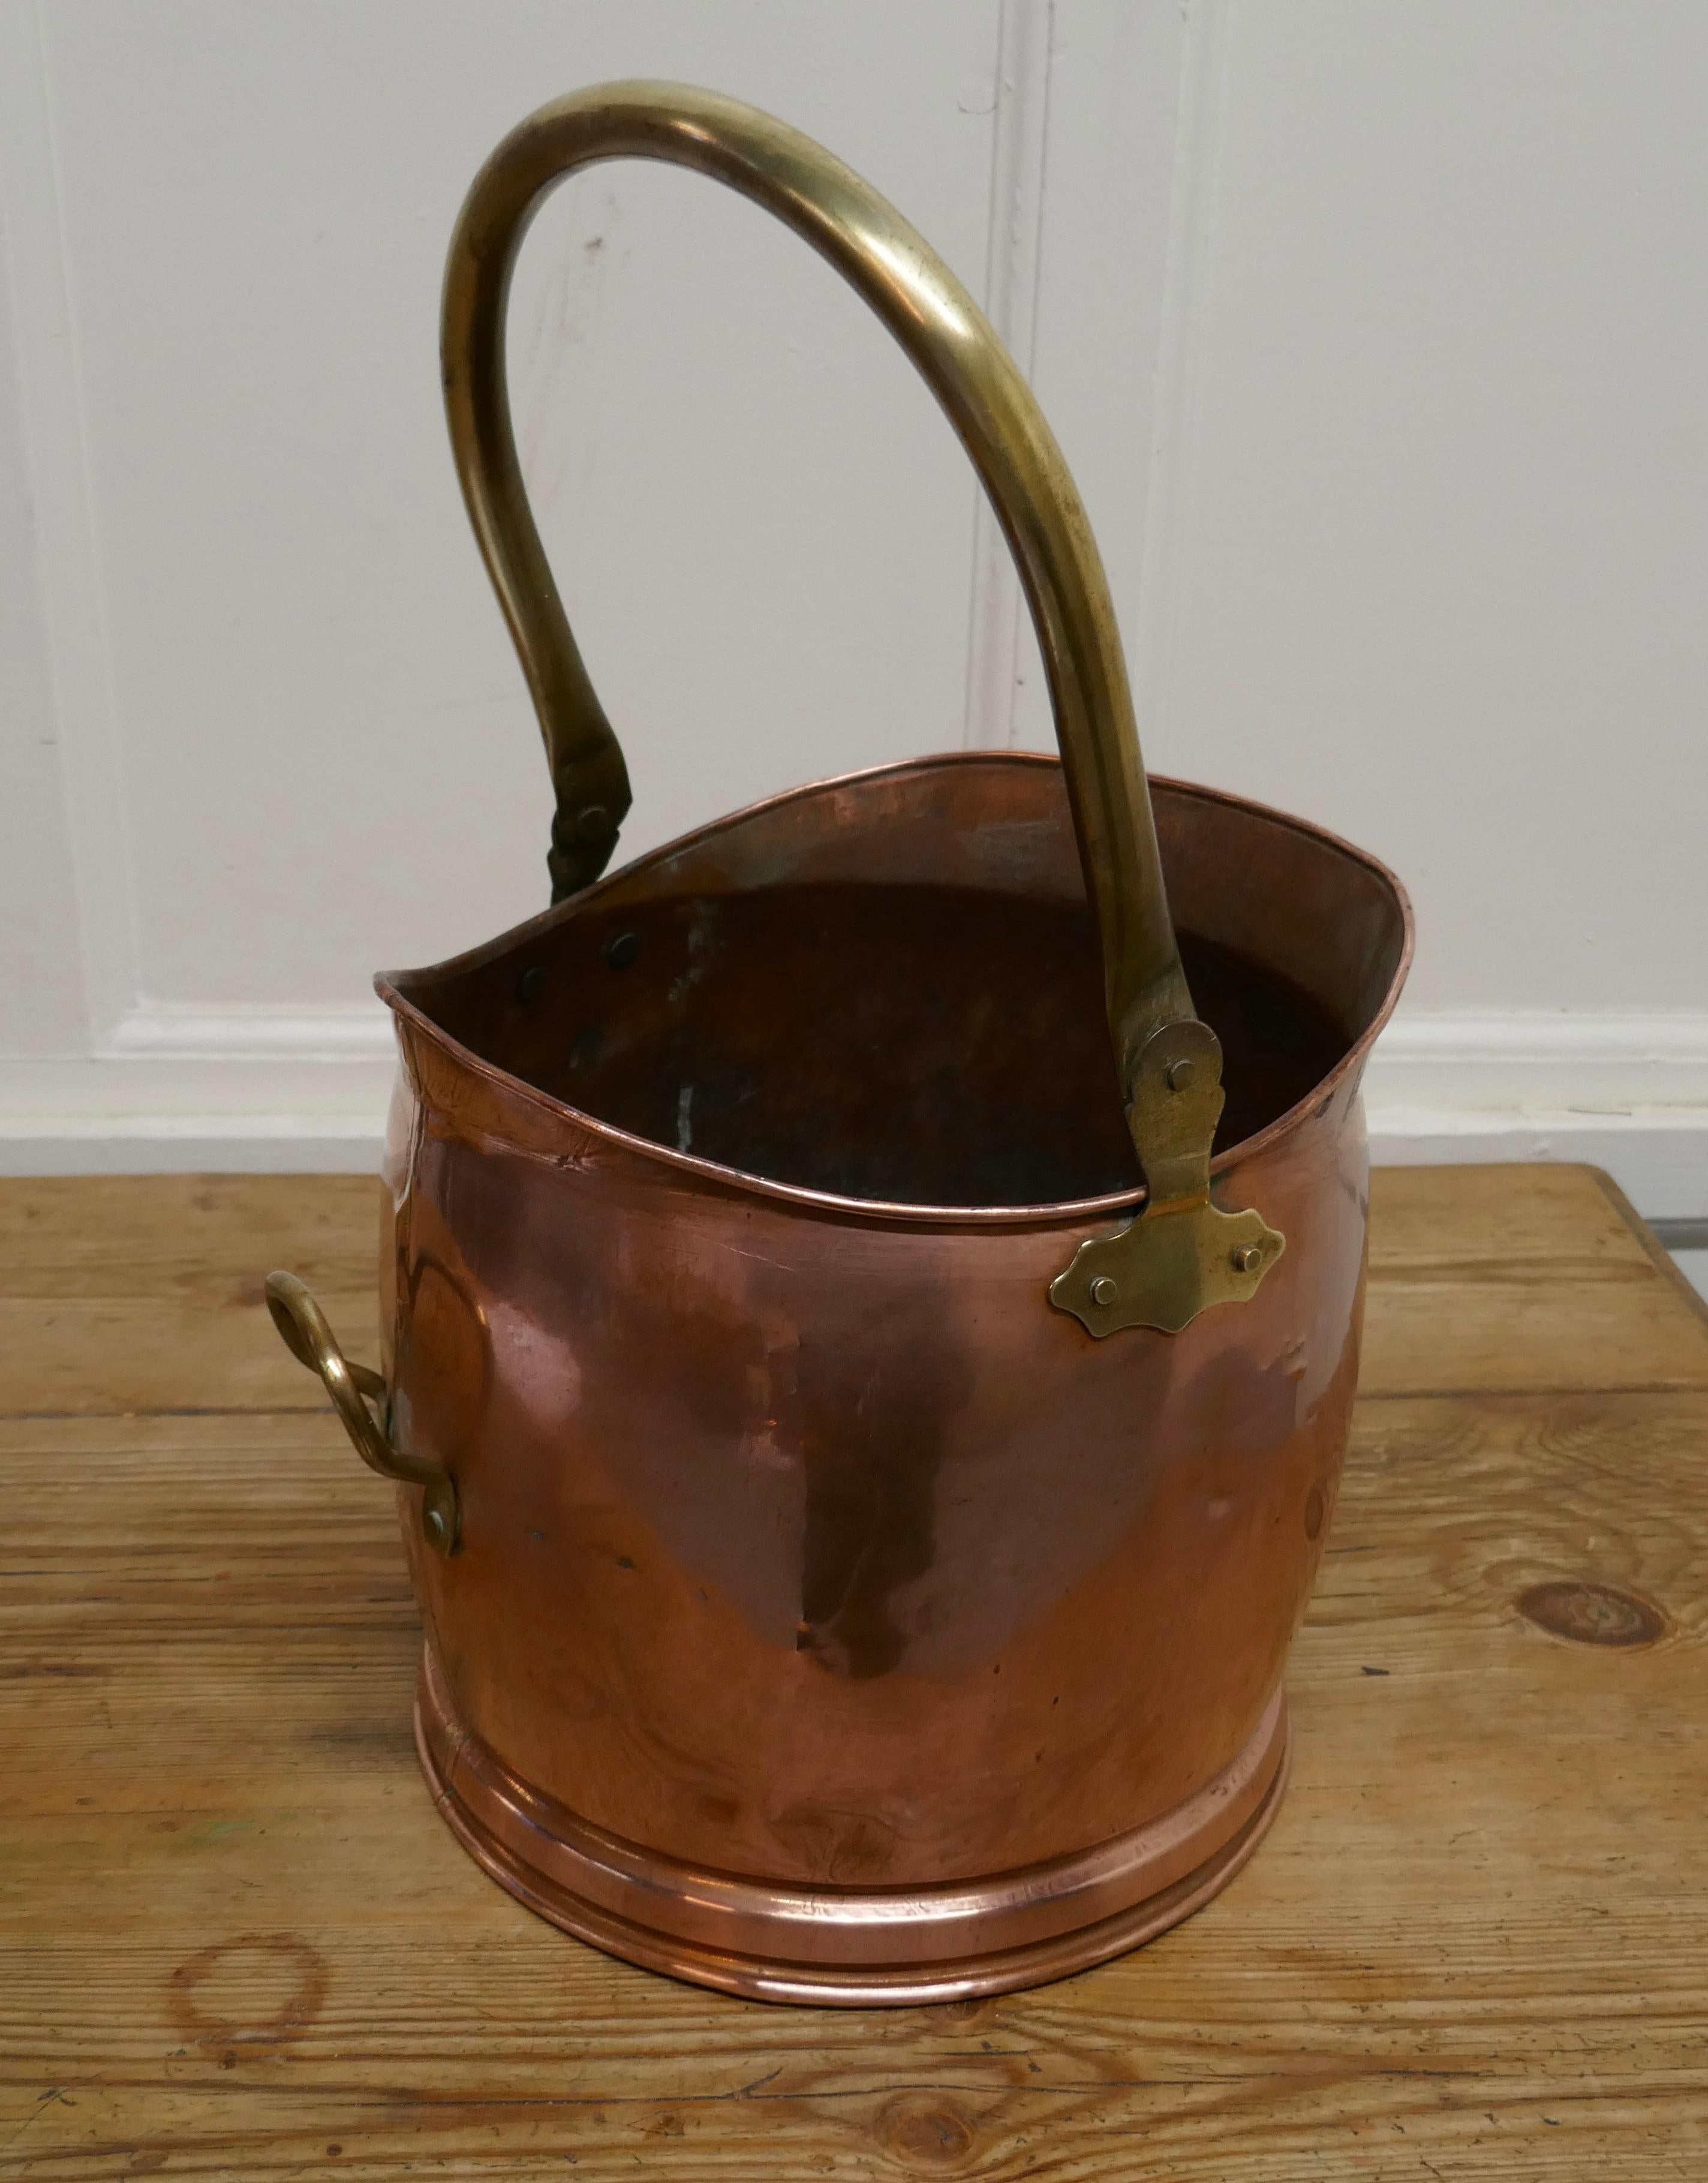 Copper Helmet Coal Scuttle

This bucket is a very attractive helmet shape, it is made in beaten copper with riveted hooped brass handles
The scuttle is in good used condition, it has no faults just lots of character and is ready to go to work and